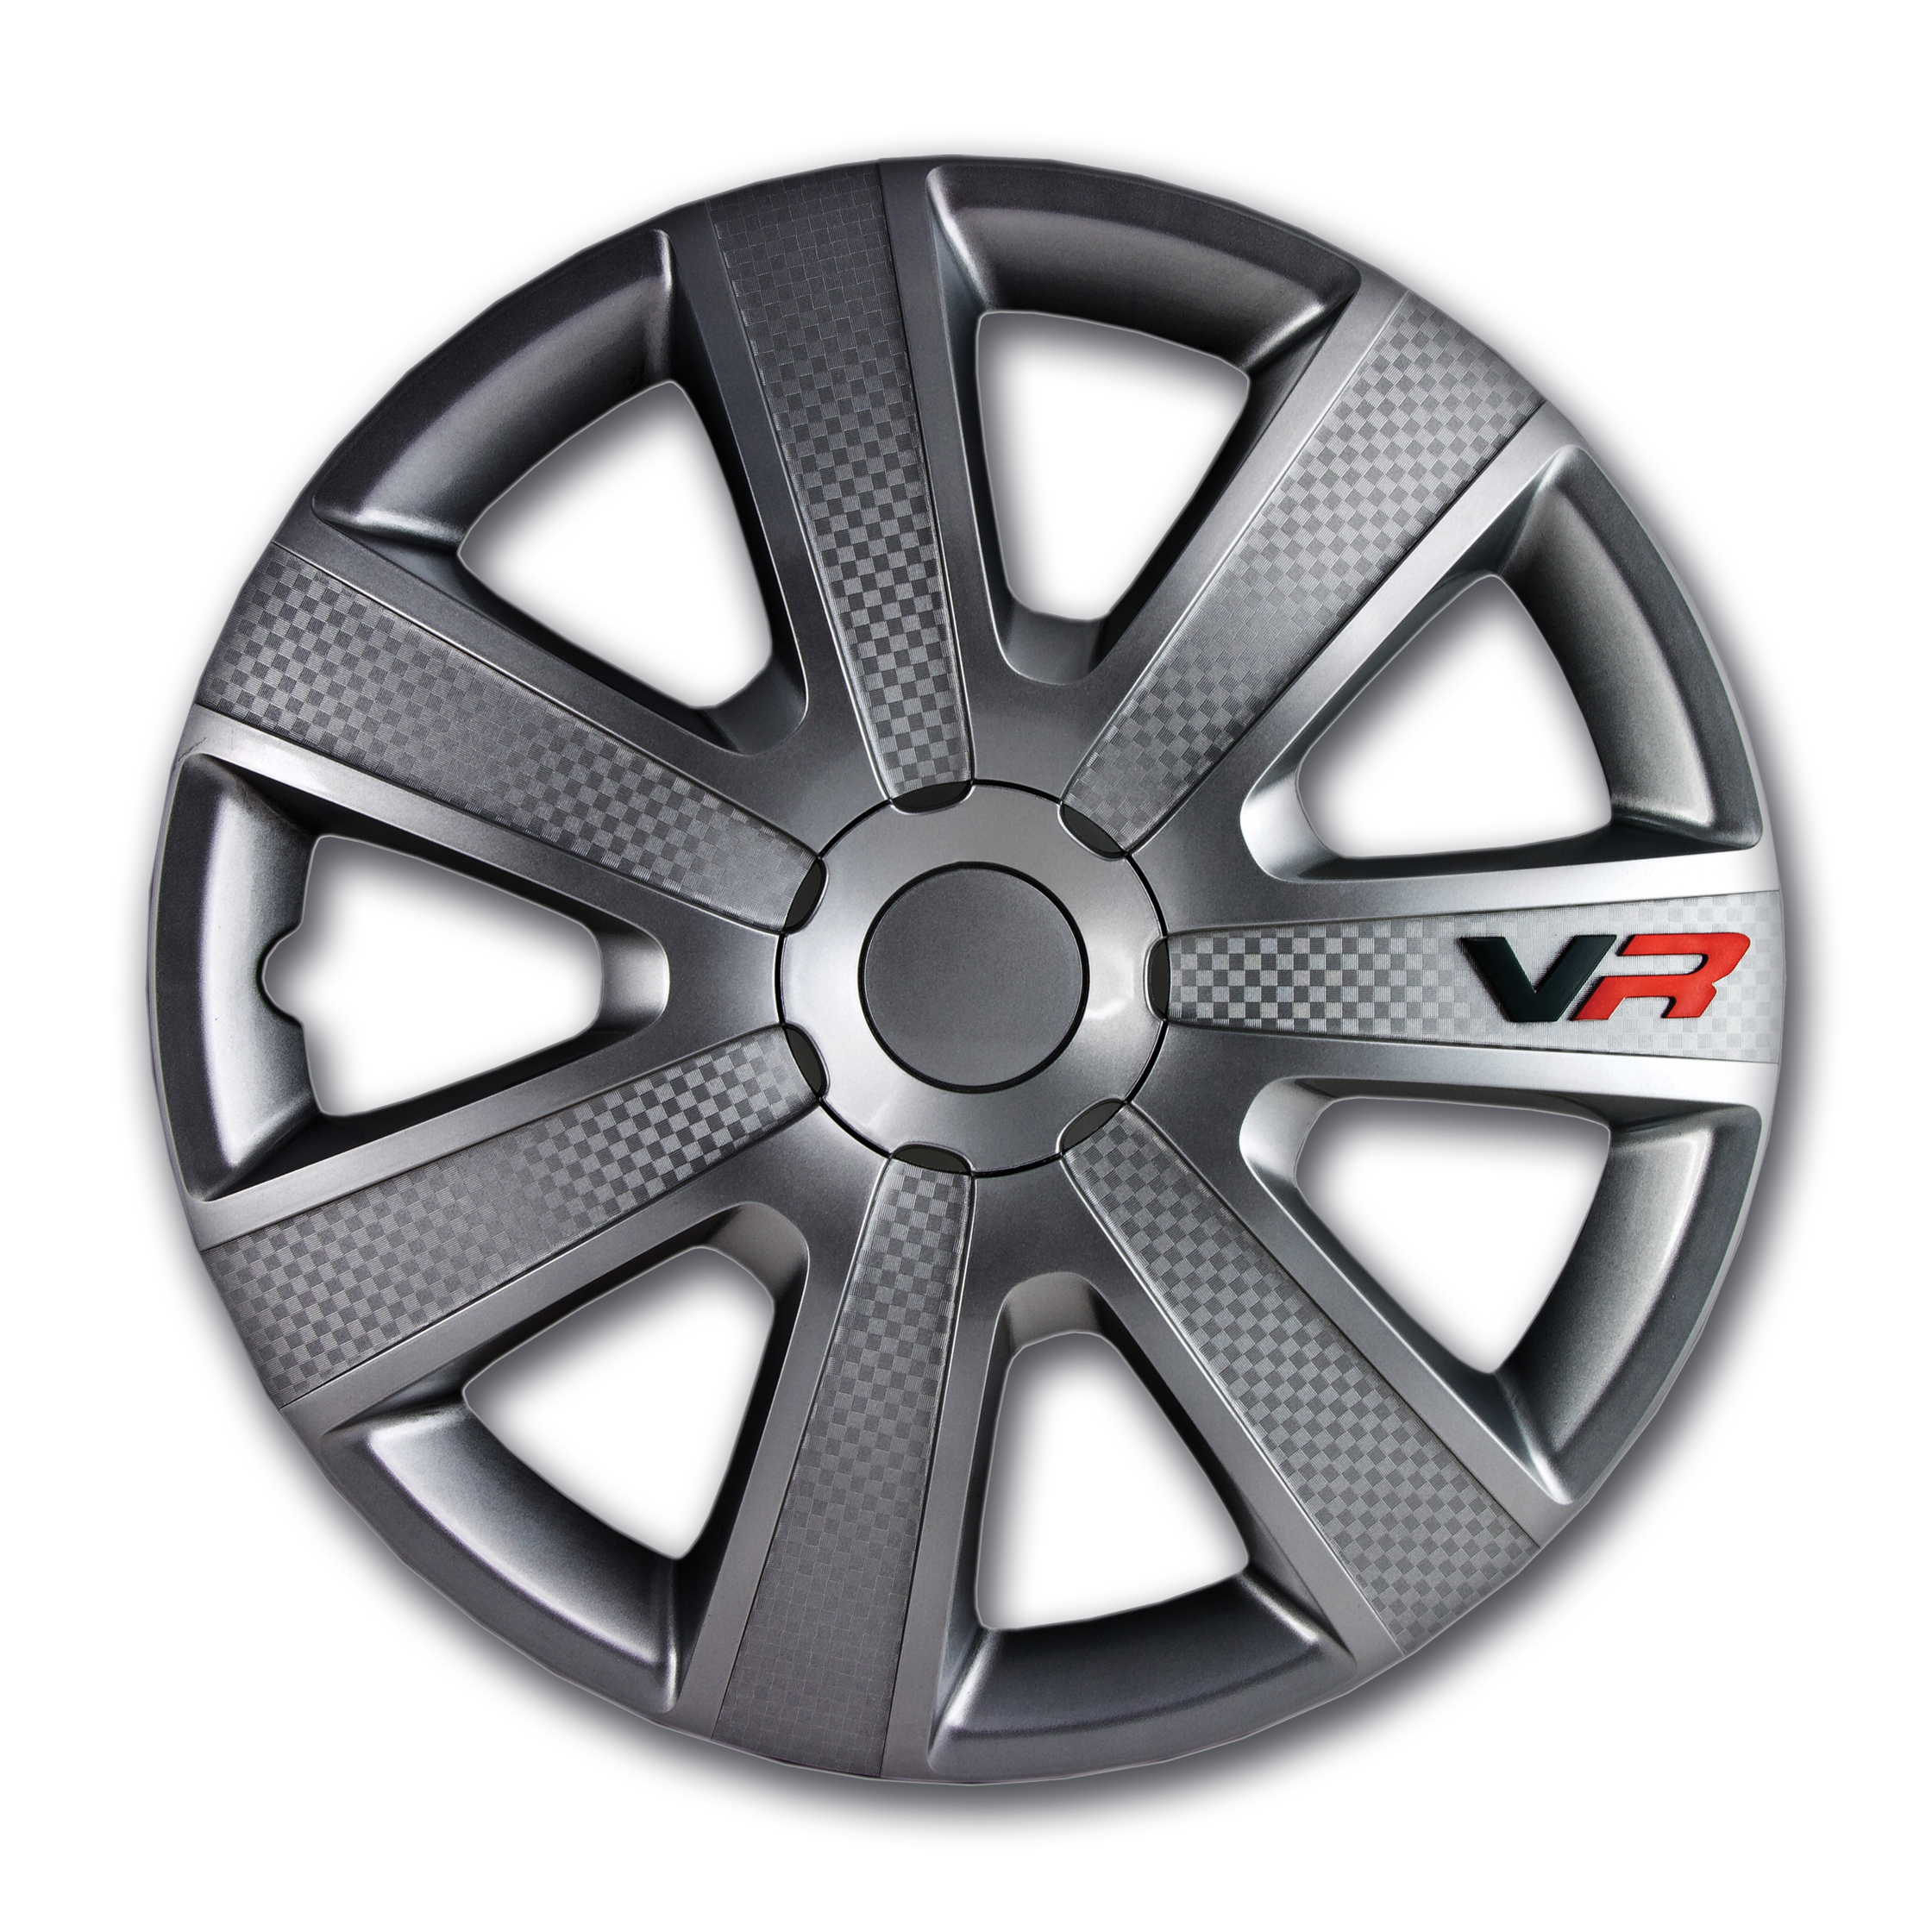 Alpena 15 inch VR Carbon Grey Wheel Cover Kit (4 Pack)